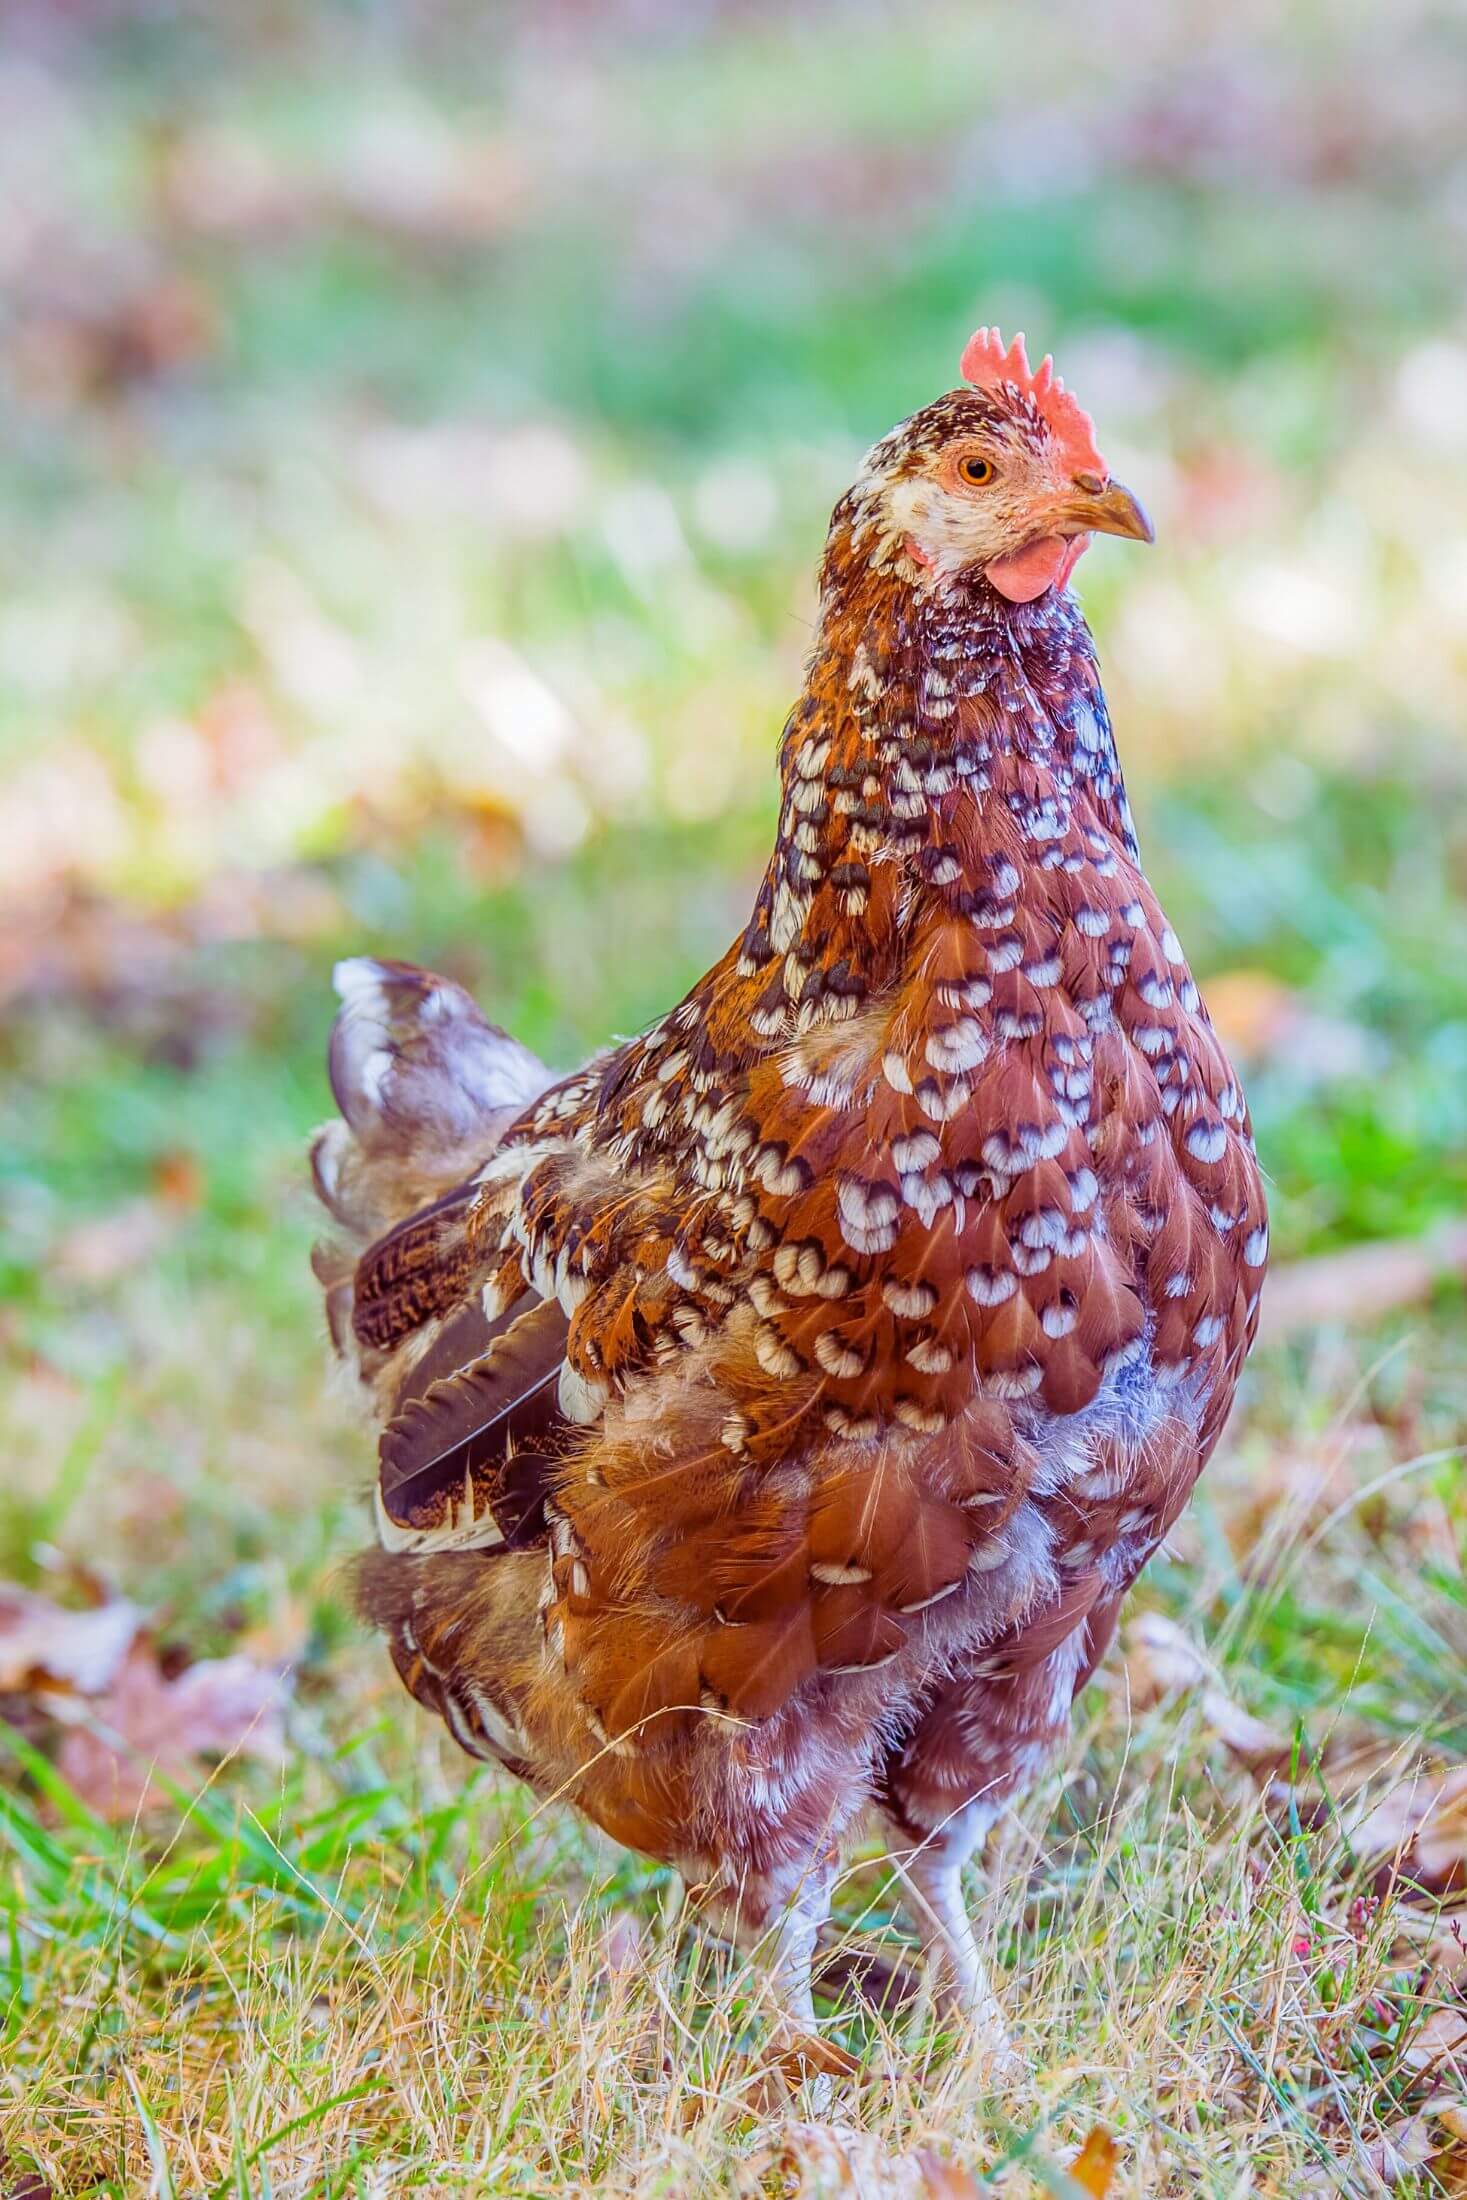 Speckled sussex hen. 